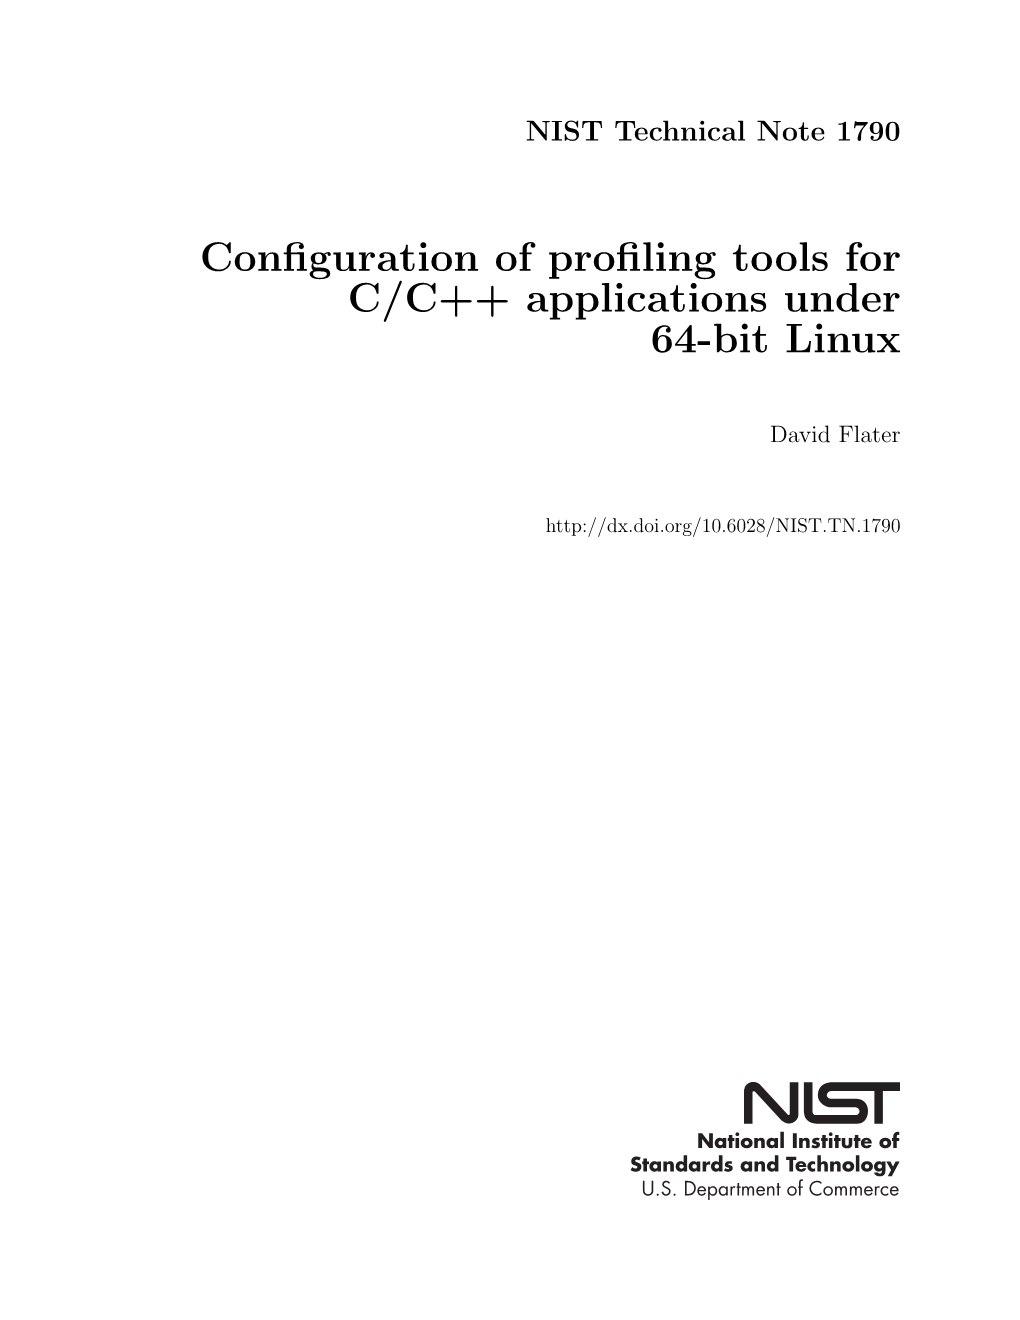 Configuration of Profiling Tools for C/C++ Applications Under 64-Bit Linux